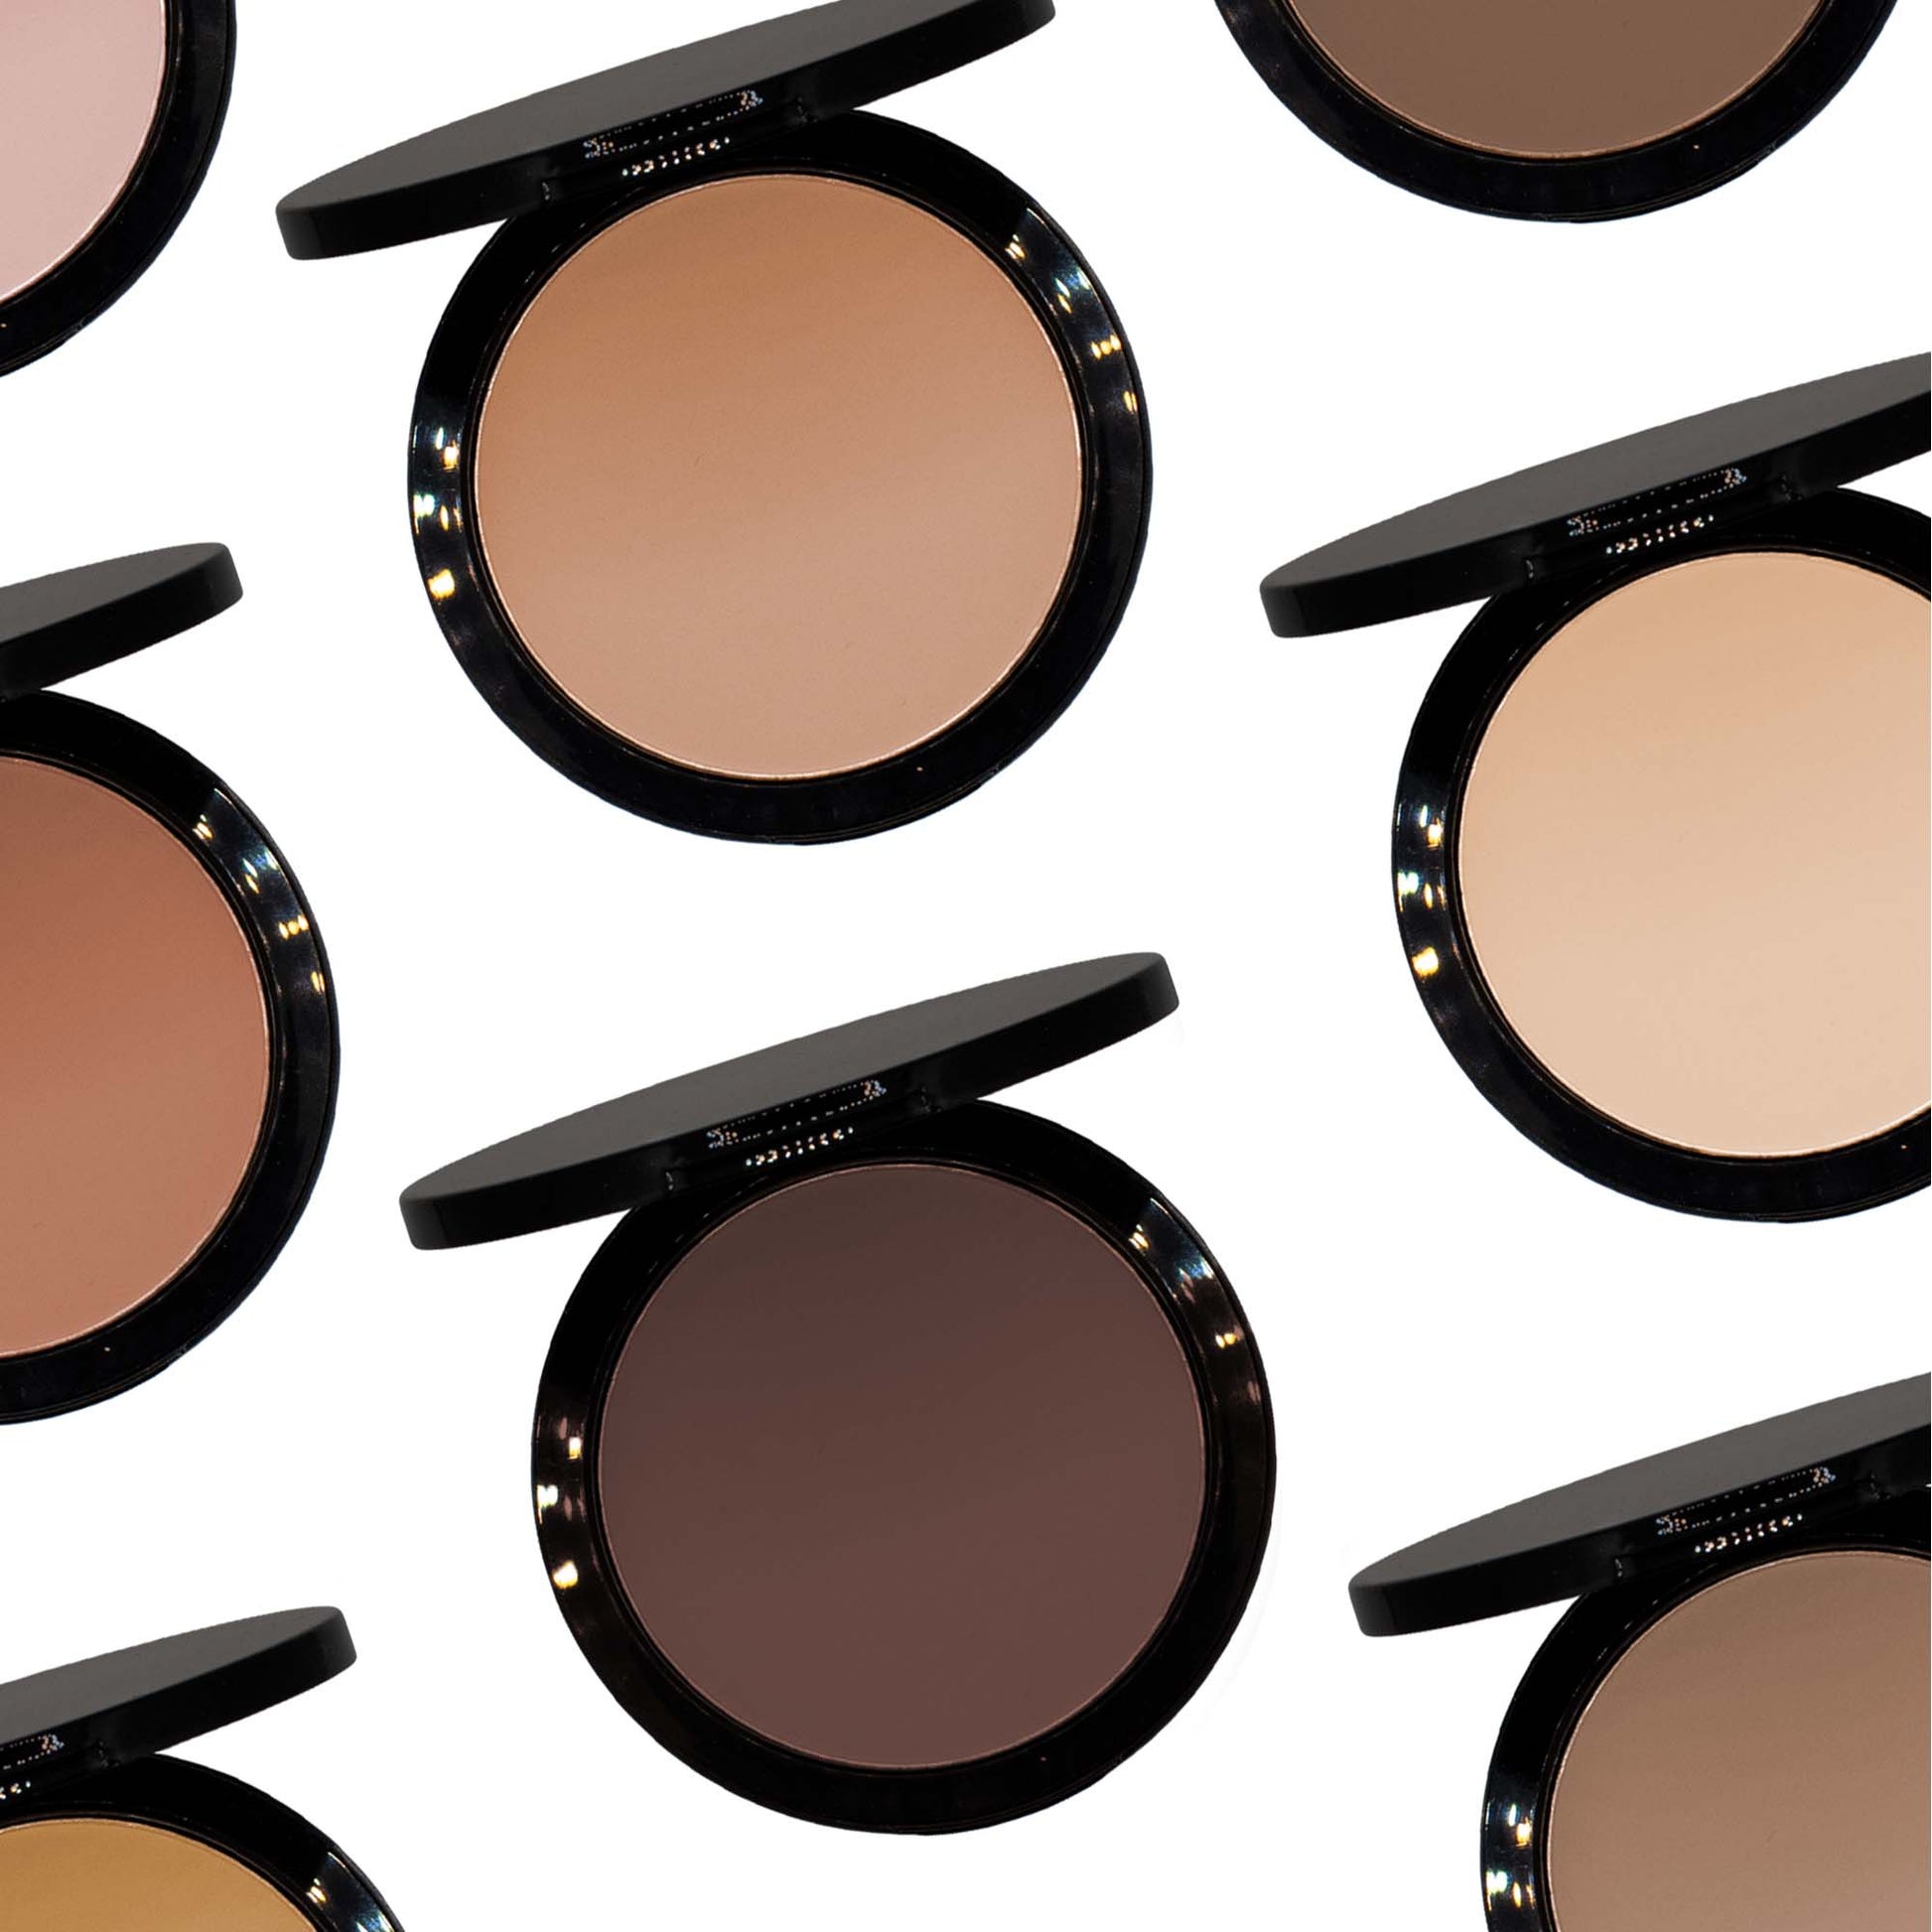 Transform your skin with Cruisin Organics Mesa powder foundation. Use dry or wet for light to full coverage in 13 shades that work in any climate. Compact design for easy, on-the-go application.